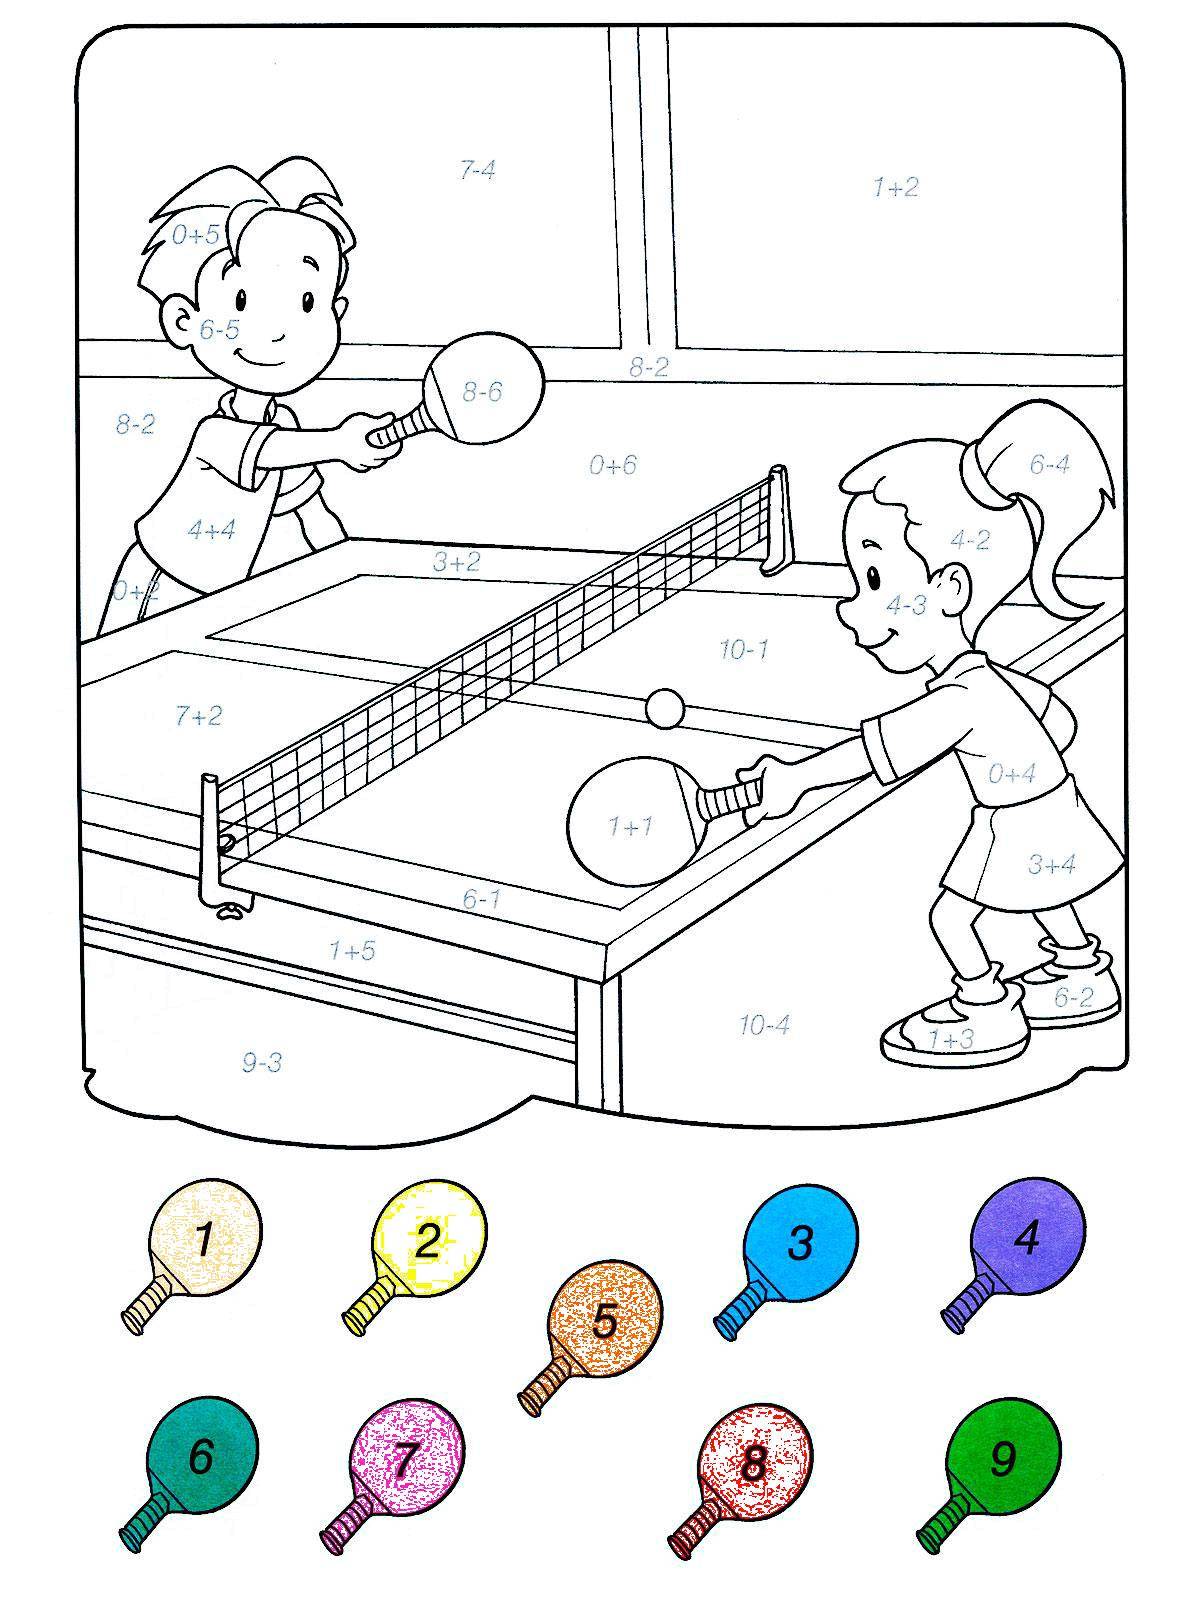 Coloring Paint players deciding examples. Category mathematical coloring pages. Tags:  sports, tennis, ping pong, examples.